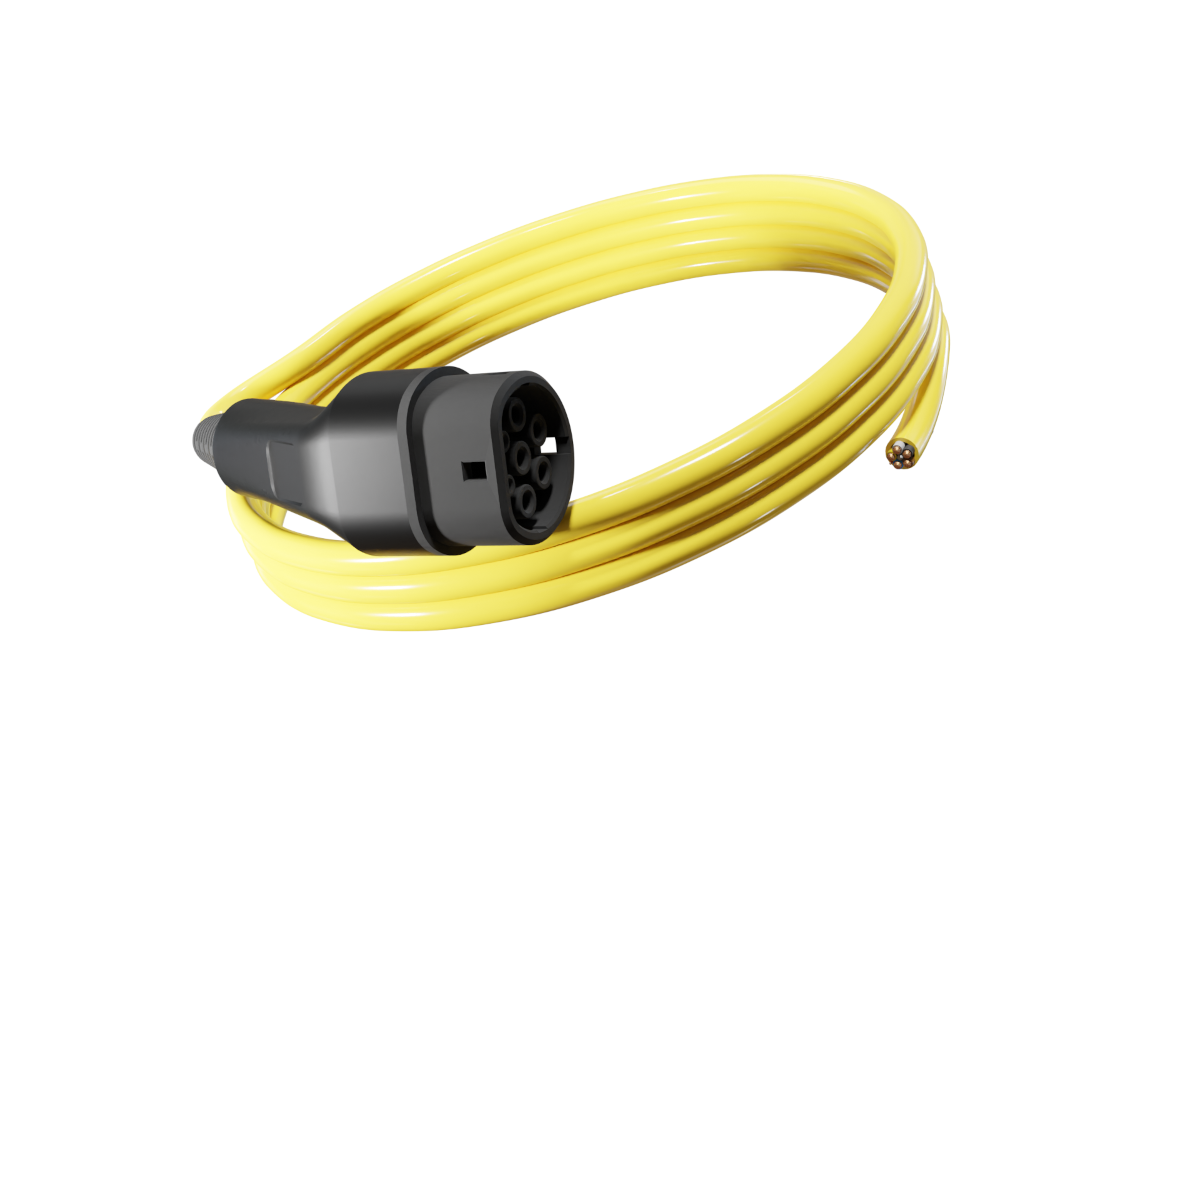 Type 2 to Schuko charge cable (3m) - RGNT Motorcycles